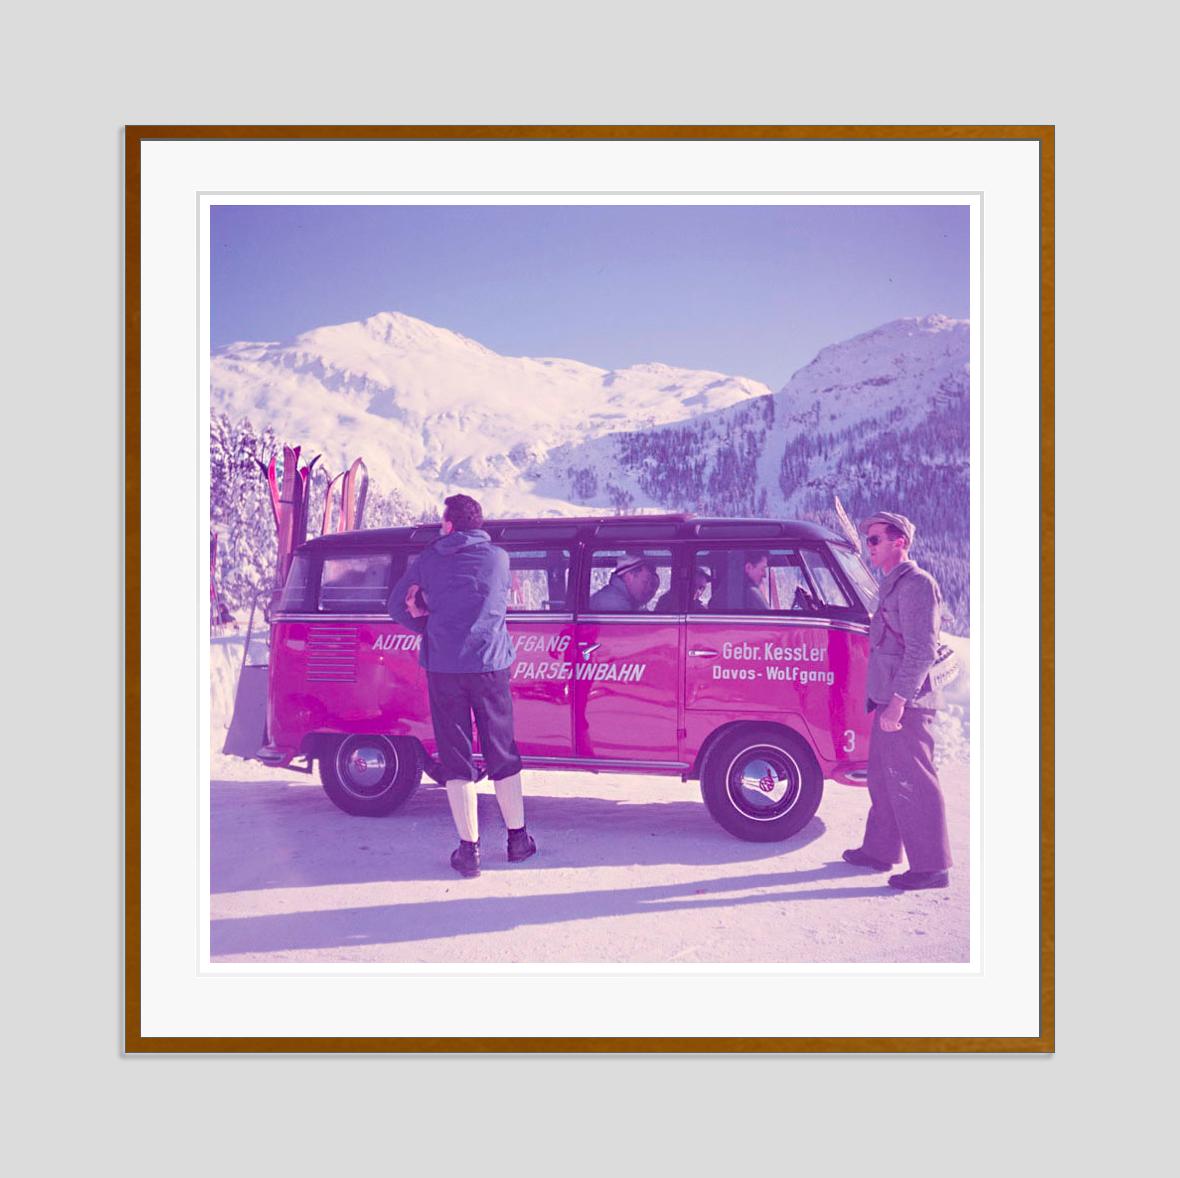 Ski Bus 1951 Limited Signature Stamped Edition  - Photograph by Toni Frissell